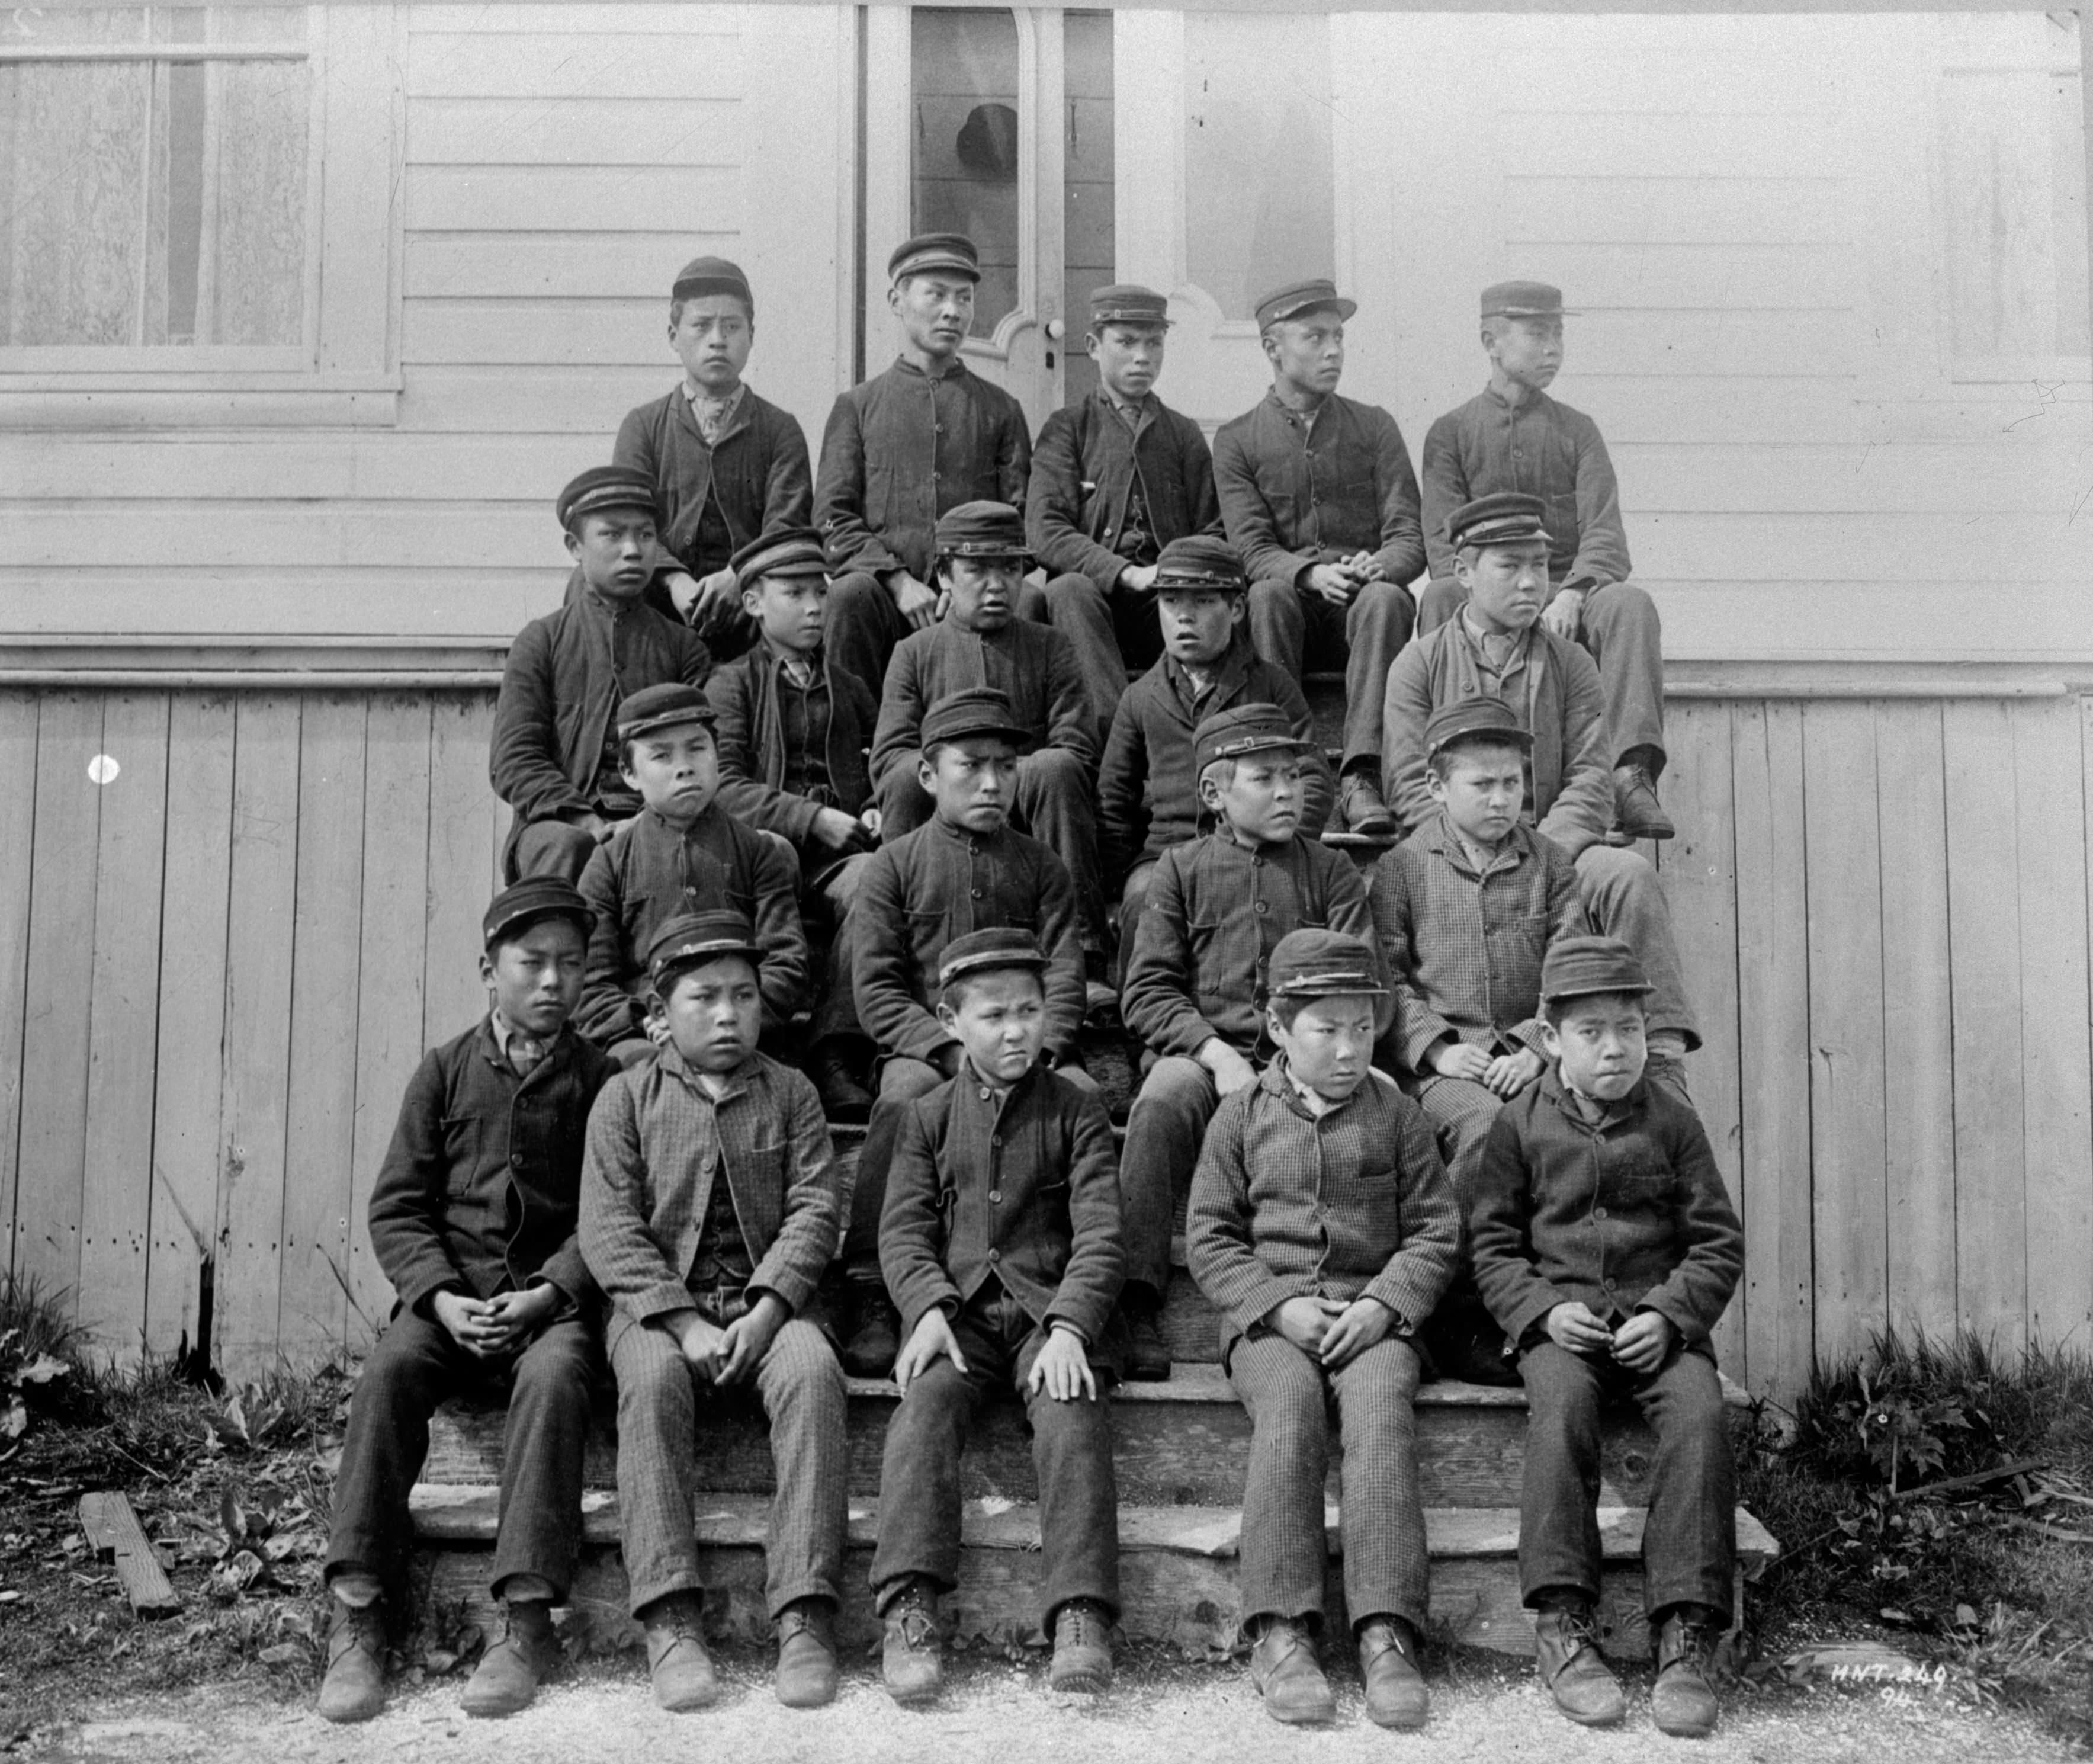 Native First Nation school children posing for a picture in Alberta, Canada in 1909. They were not allowed to speak anything but English, nor wear or discuss anything related to their tribes. It was Canadas way of destroying the Native culture, just like the US tried with Native Americans around the same time period.